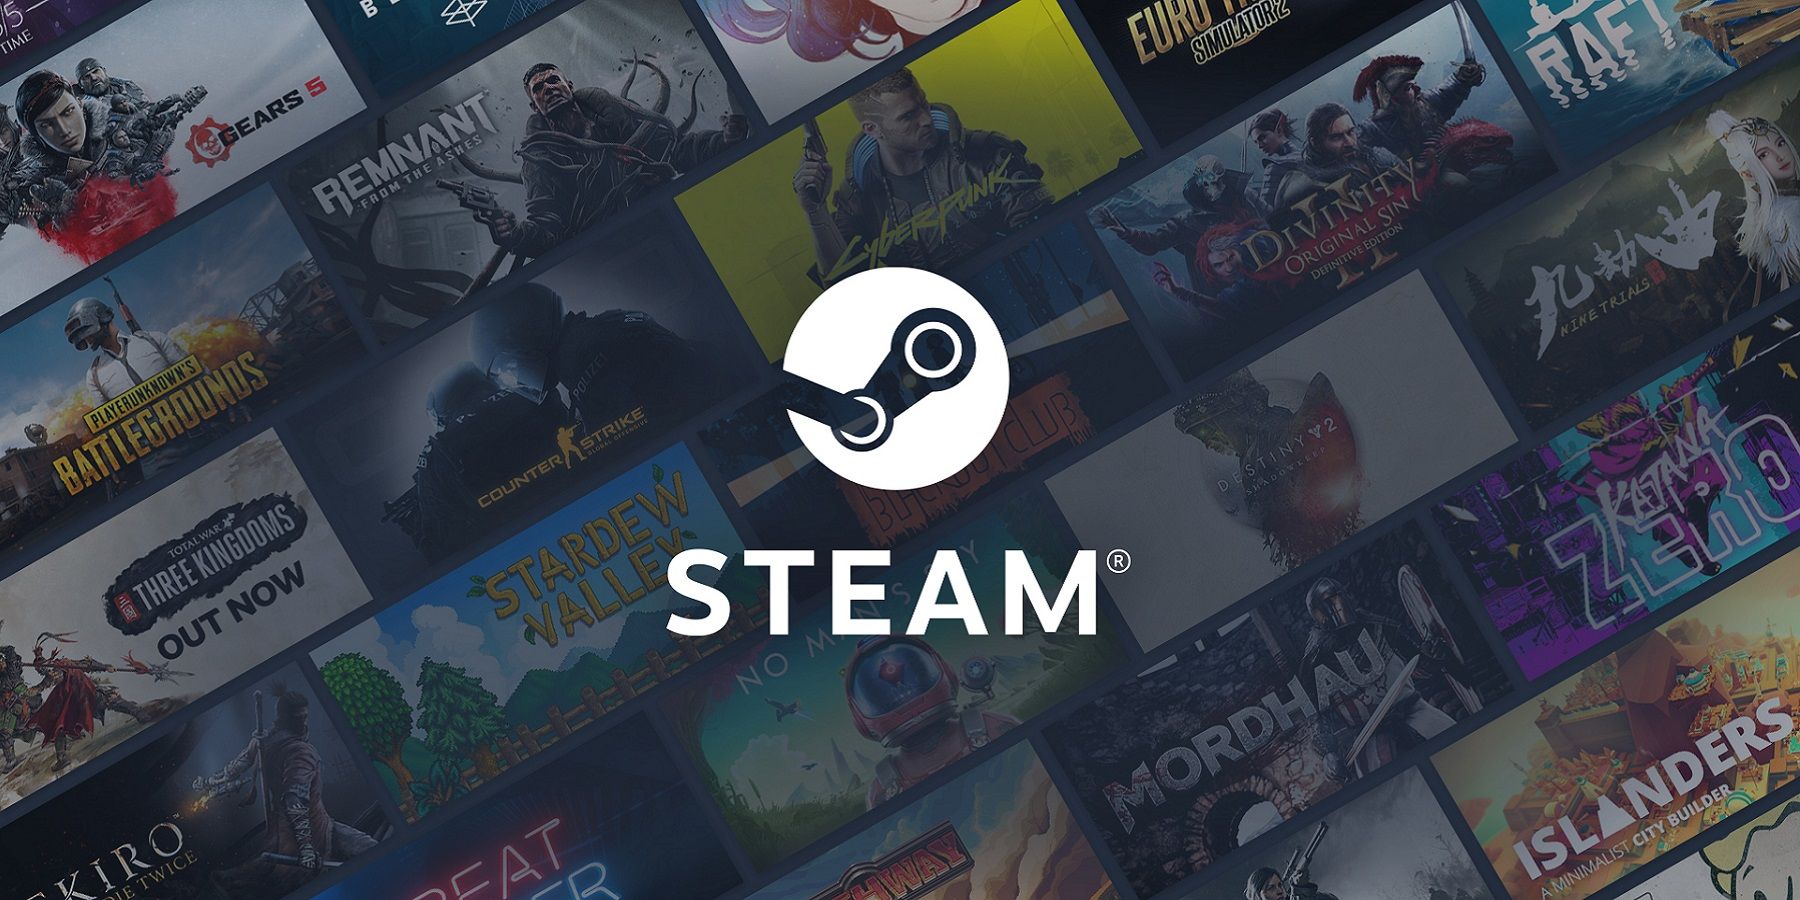 The Steam logo with a series of games behind it, such as Cyberpunk 2077 and Gears 5.